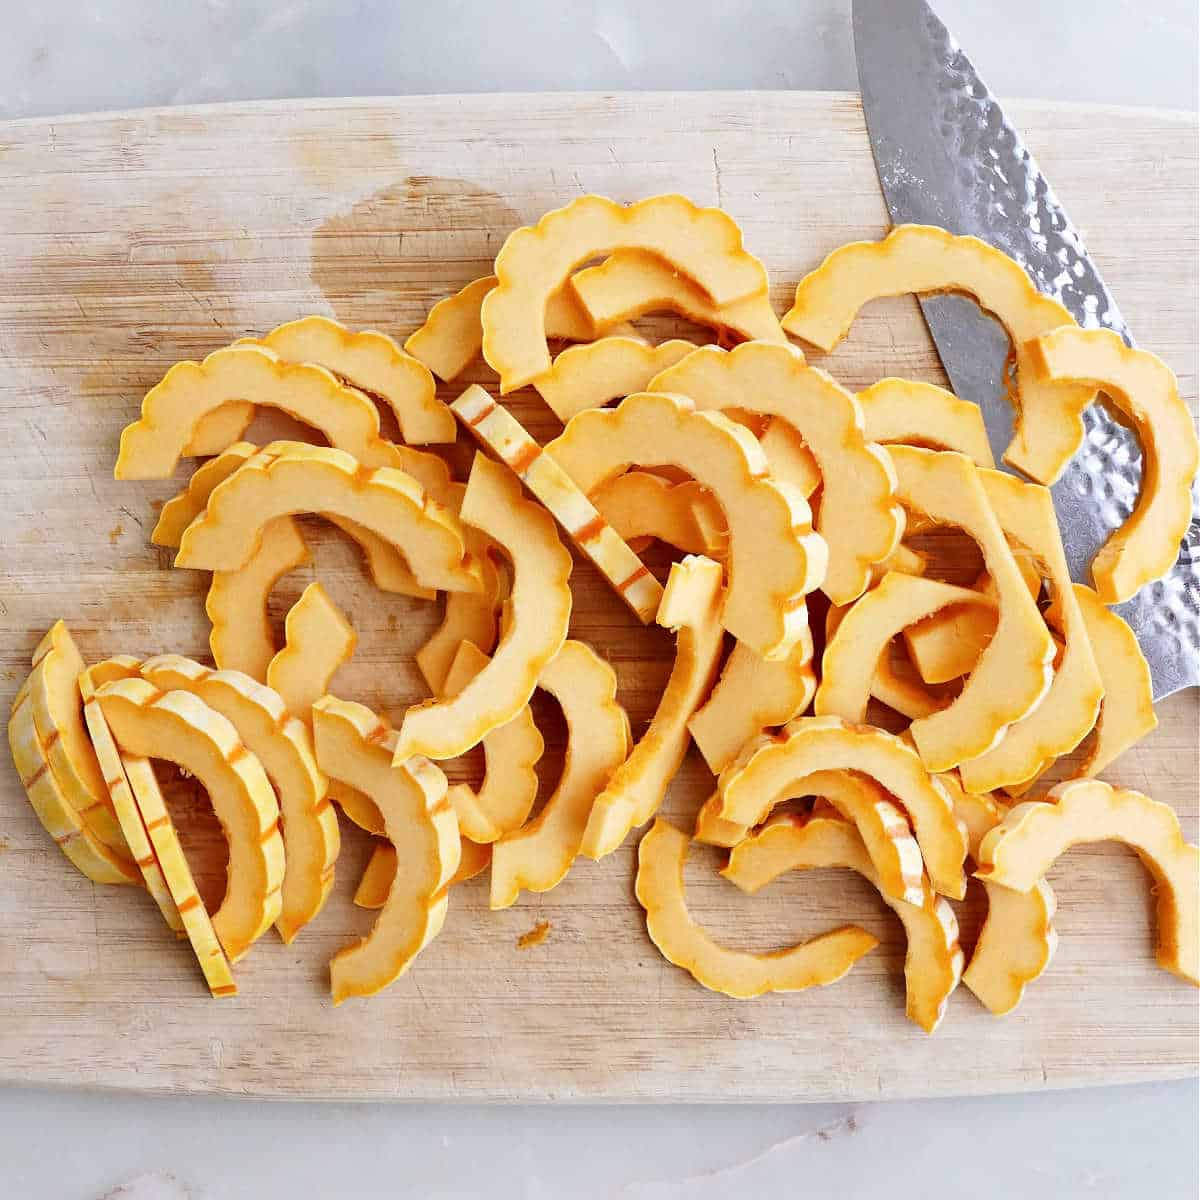 delicata squash sliced into half-moon pieces on a cutting board with a knife